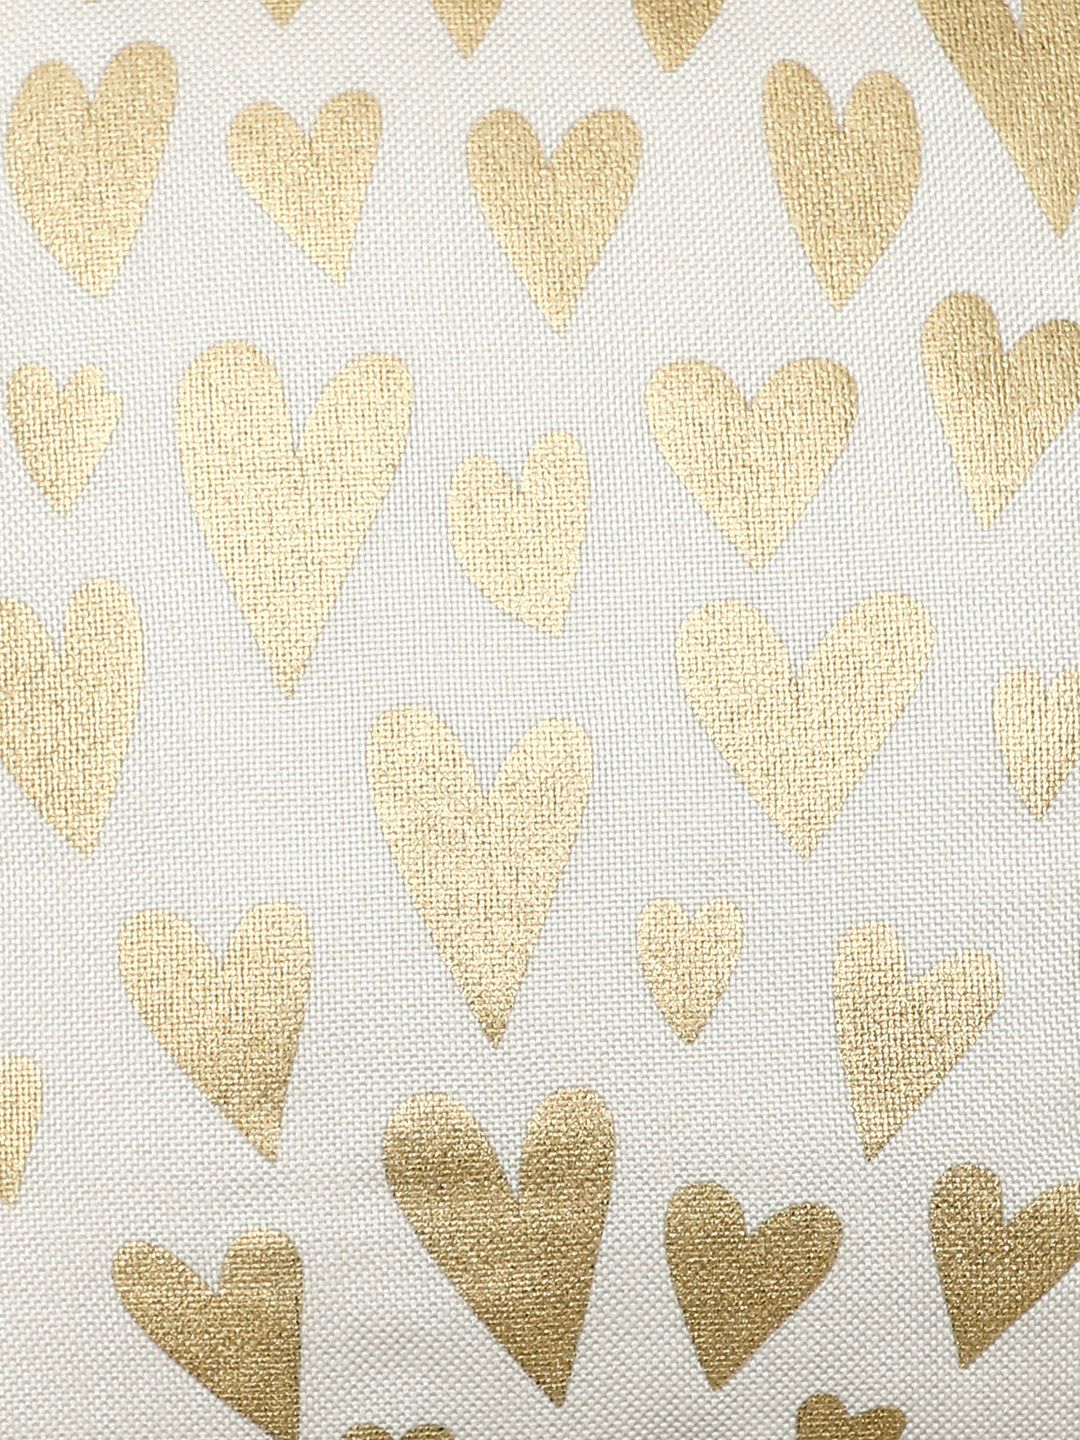 Detec™ Hosta Beige Golden Heart Printed 16 x 16 inches Cushioned Cover (Set of 5 )